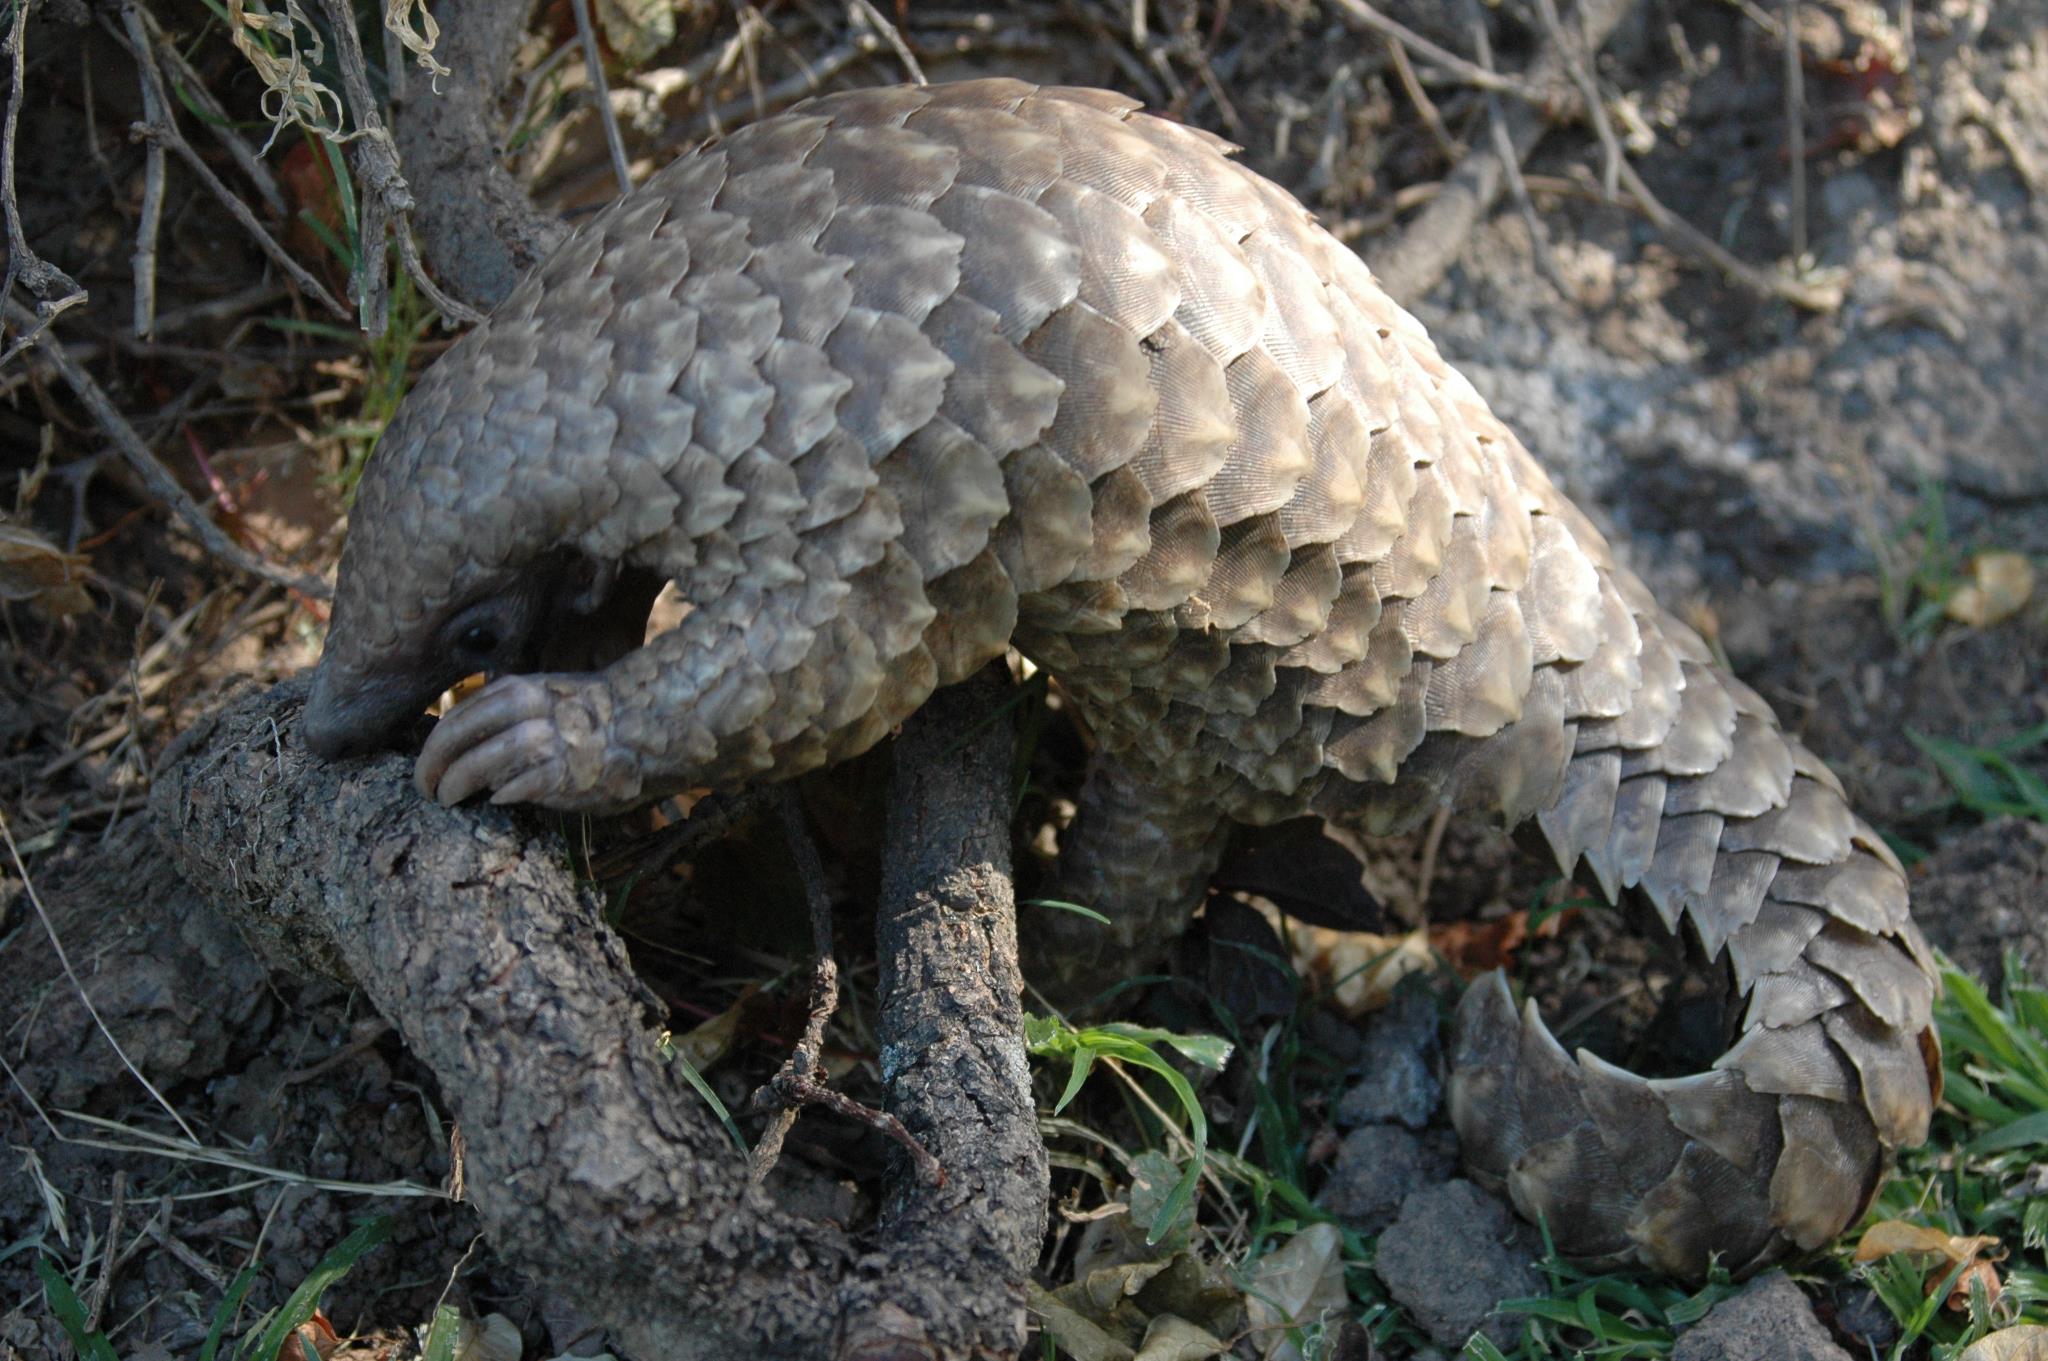 A pangolin foraging in its habitat.  Image courtesy of Tikki Hywood Trust.